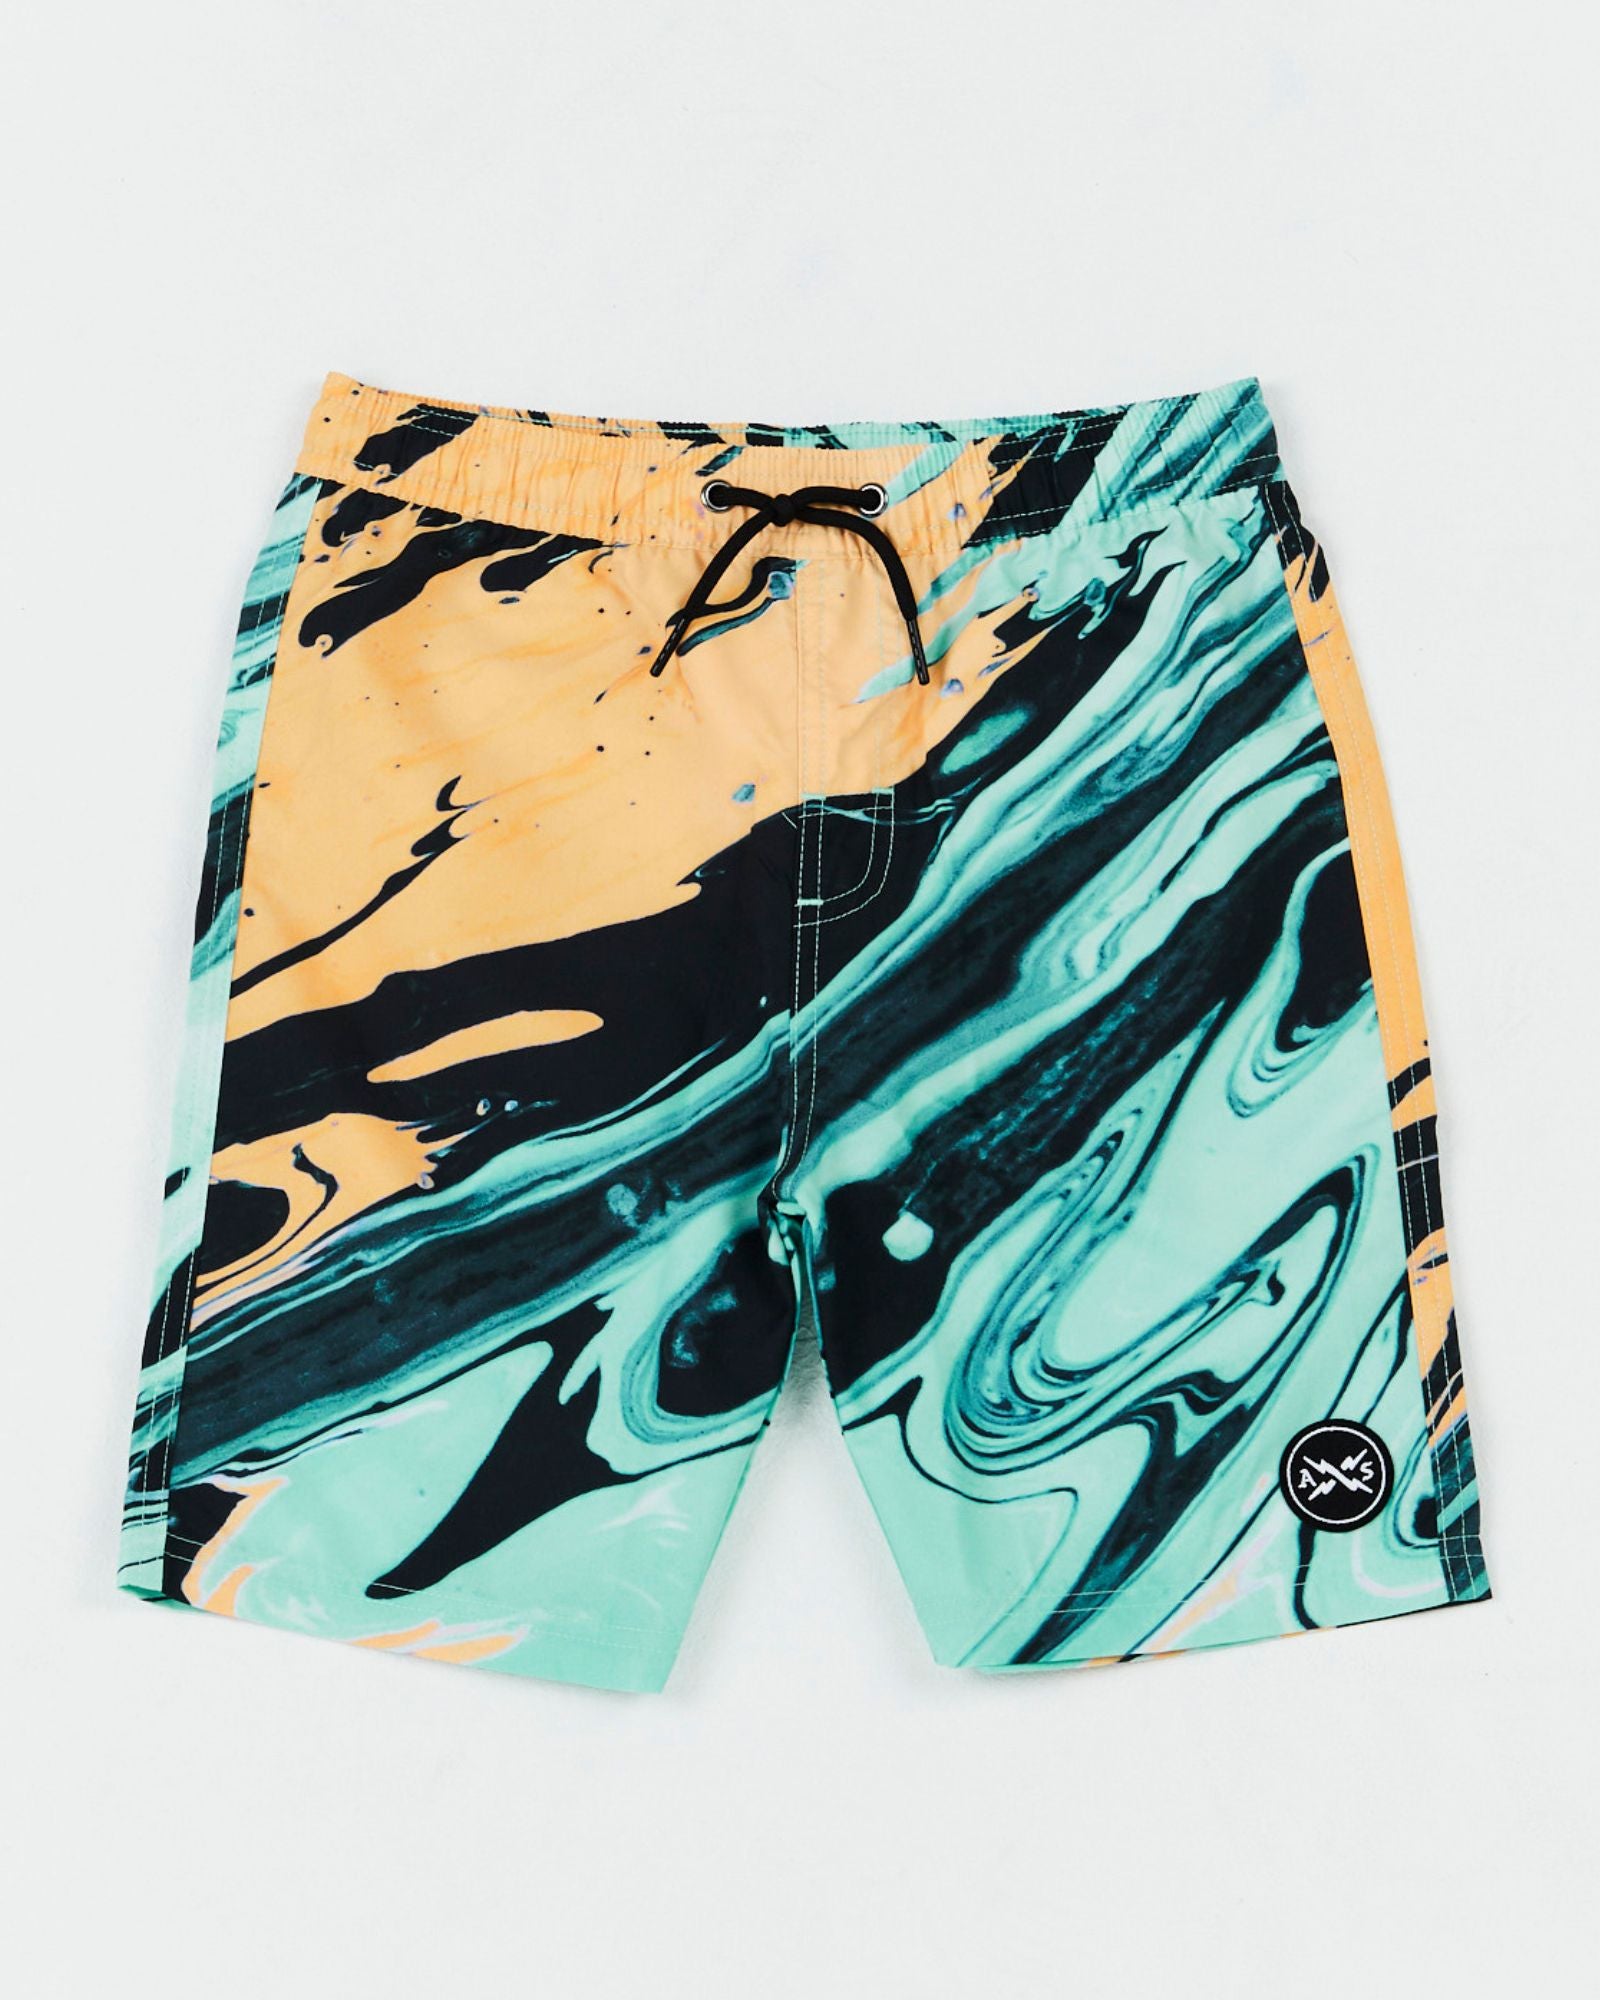 Kids Twister Boardshort Melon Asst in printed swirlKids Twister Boardshorts by Alphabet Soup for boys aged 2-7. Featuring melon/mint/black swirl paint print colorway, recycled polyester microfiber. These shorts feature an adjustable drawcord and a faux fly, plus a secure back pocket complete with a woven logo patch.